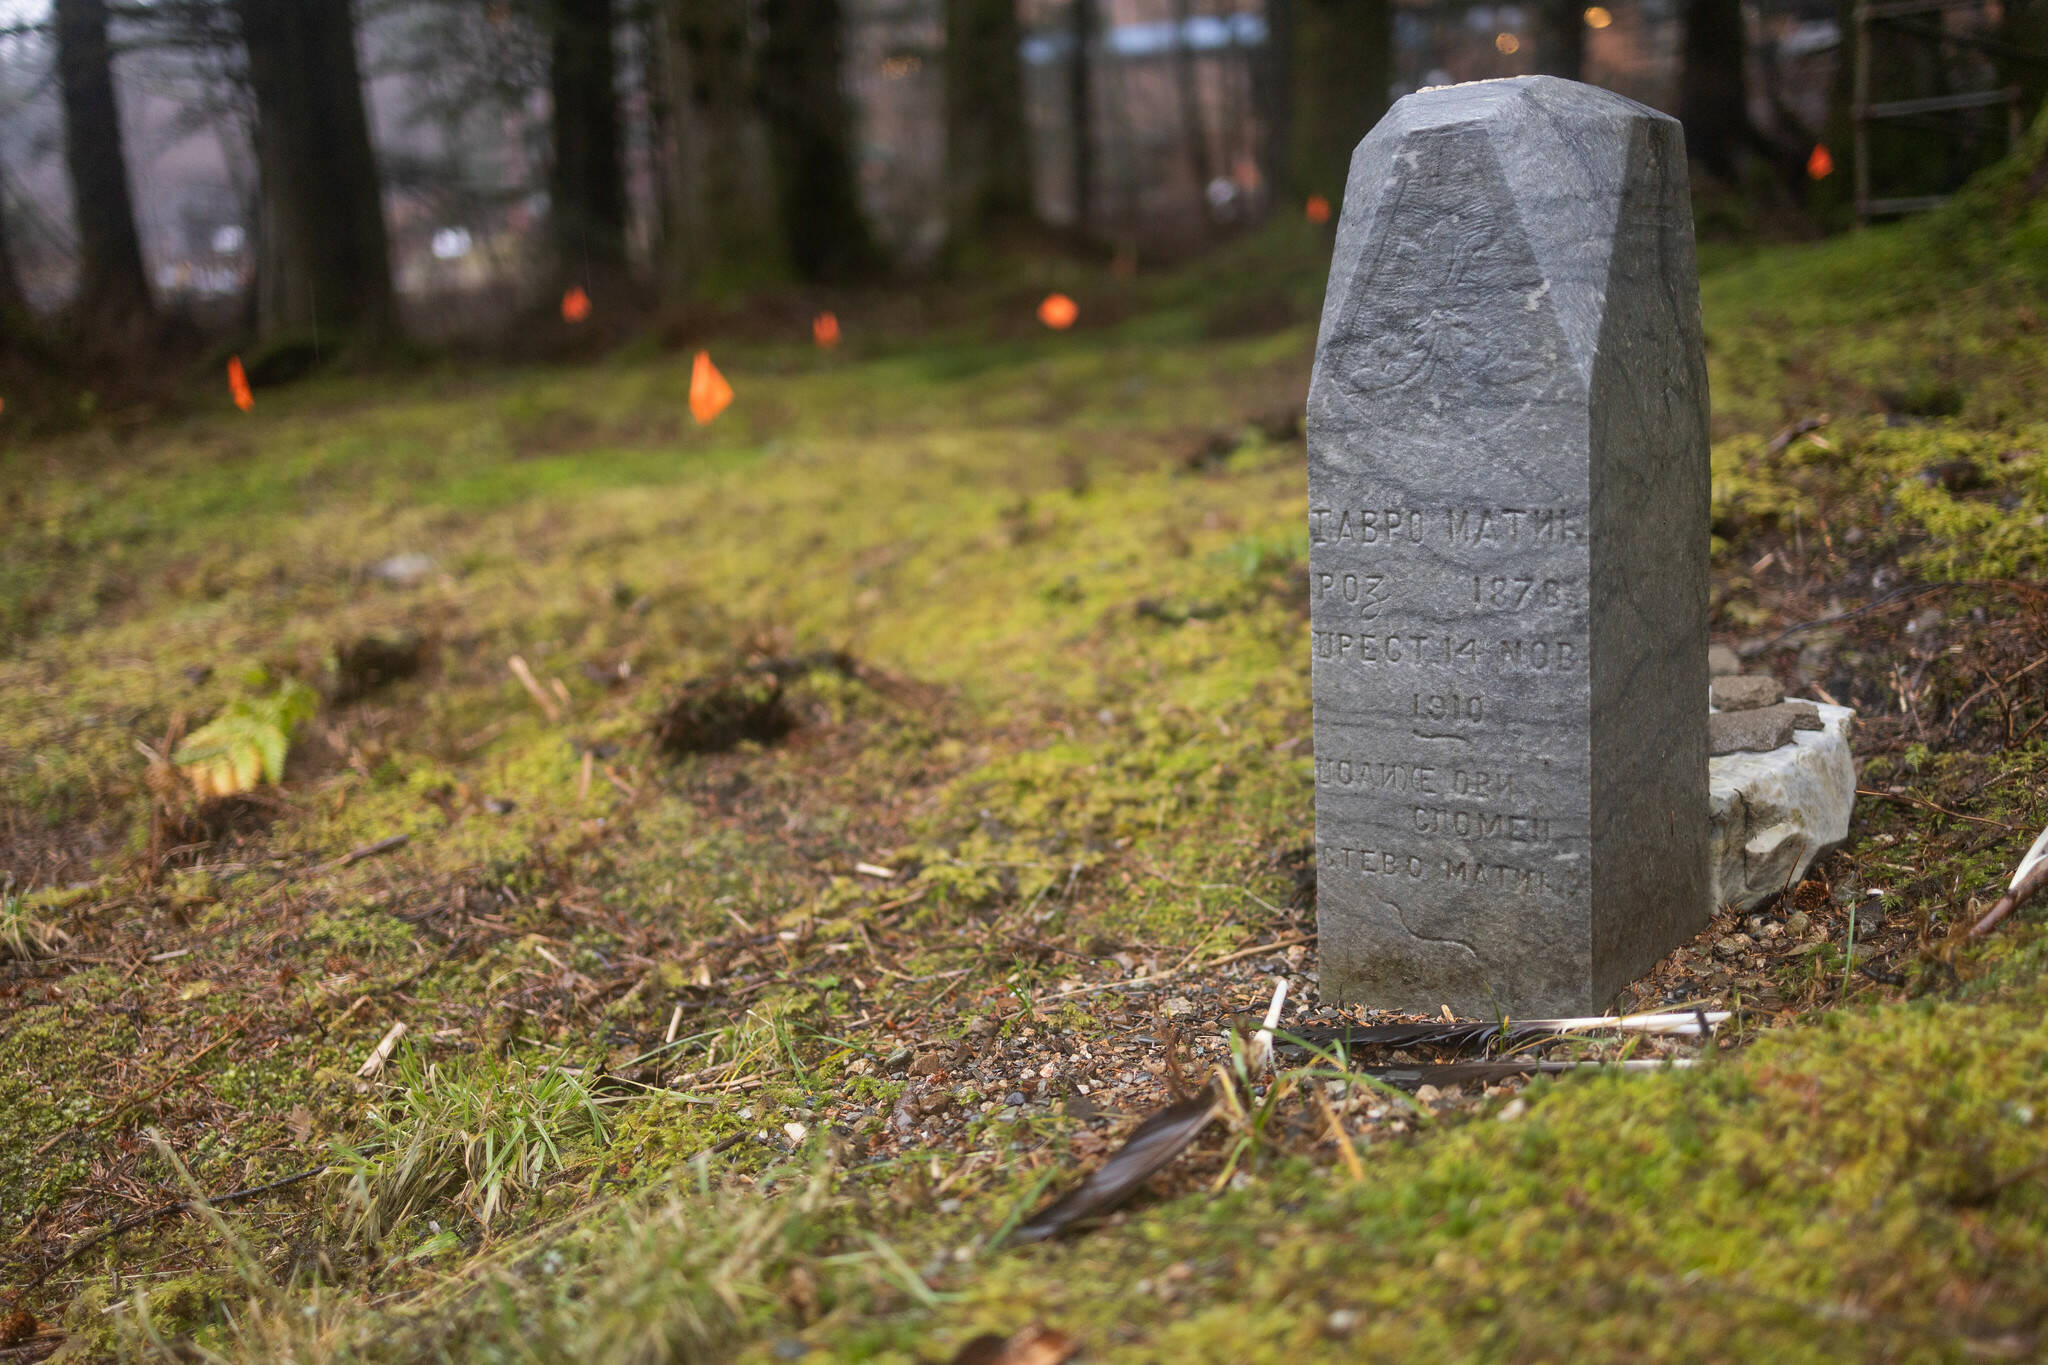 Jamiann Hasselquist, HTL coalition, and others have partnered on the rehabilitation of a series of cemeteries that contained many undocumented graves prior to the project. The group has cleared brush and raised gravestones, and has requested that the City and Borough of Juneau take on the maintenance of this important and sacred resting space. (Photo by Ḵaa Yahaayí Shkalneegi Muriel Reid)